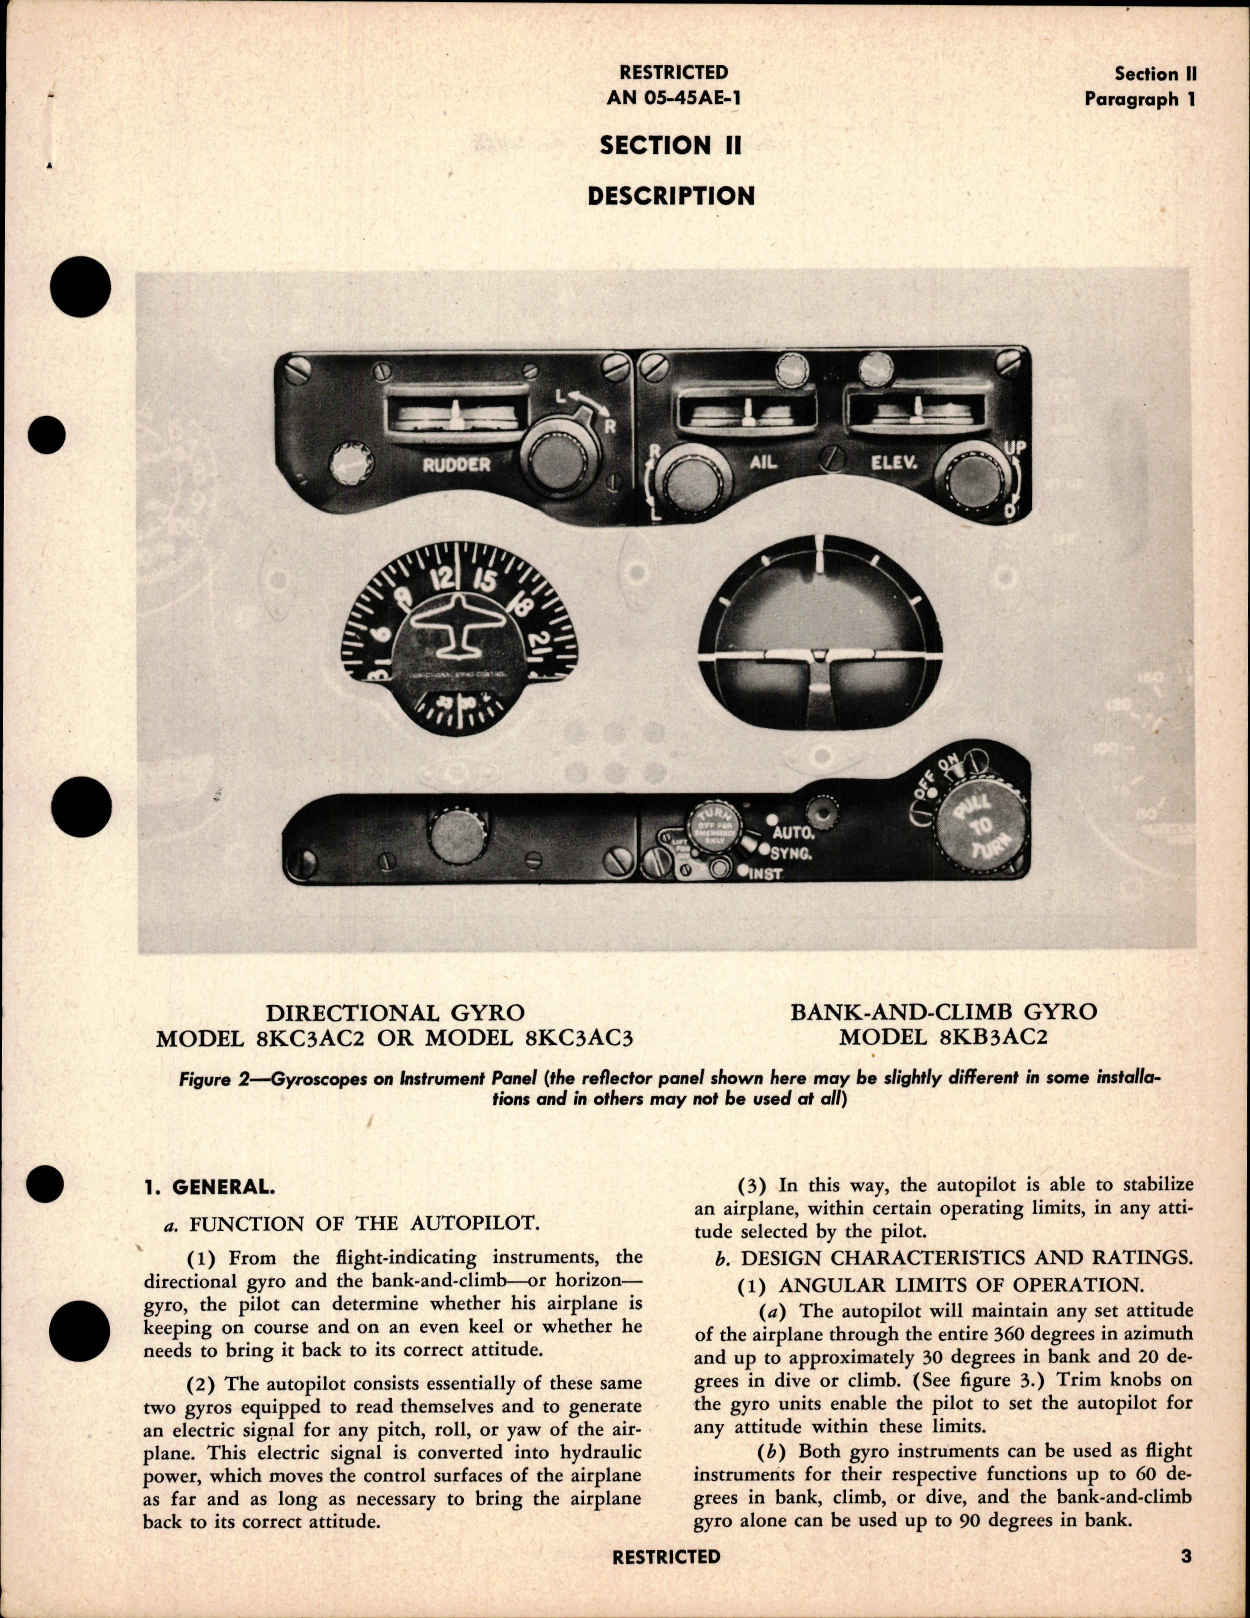 Sample page 7 from AirCorps Library document: Operation and Service Instructions for Automatic Pilot Type G-1, G.E. Model 2CJ1A1